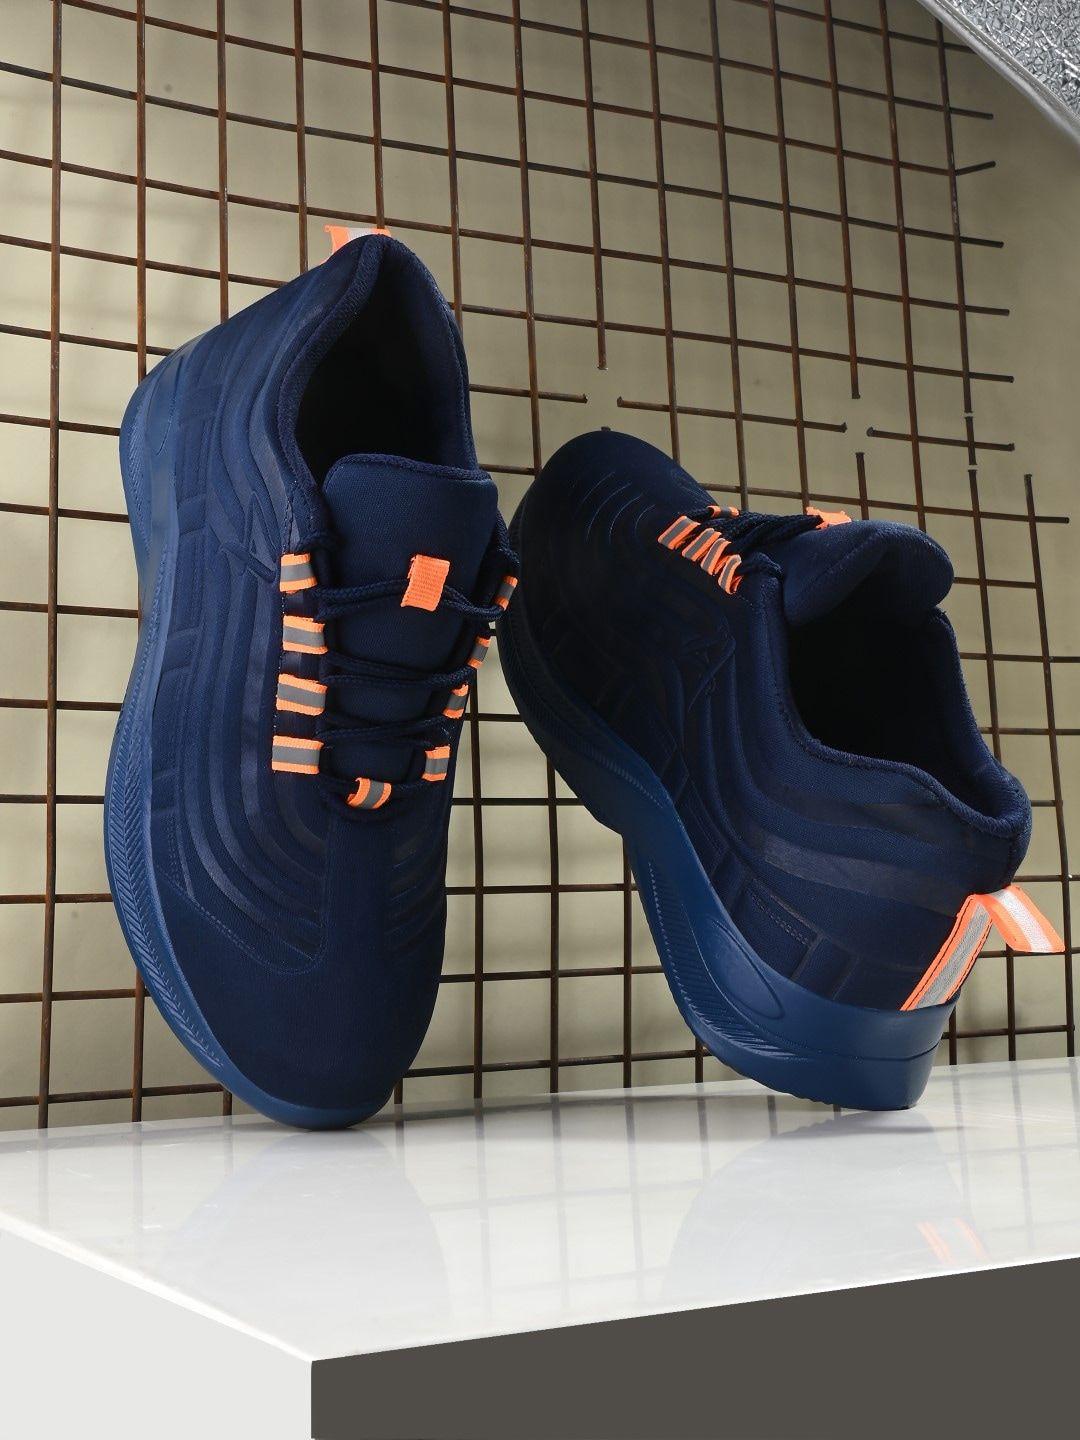 the roadster lifestyle co. men navy blue & orange lightweight lace-up sneakers